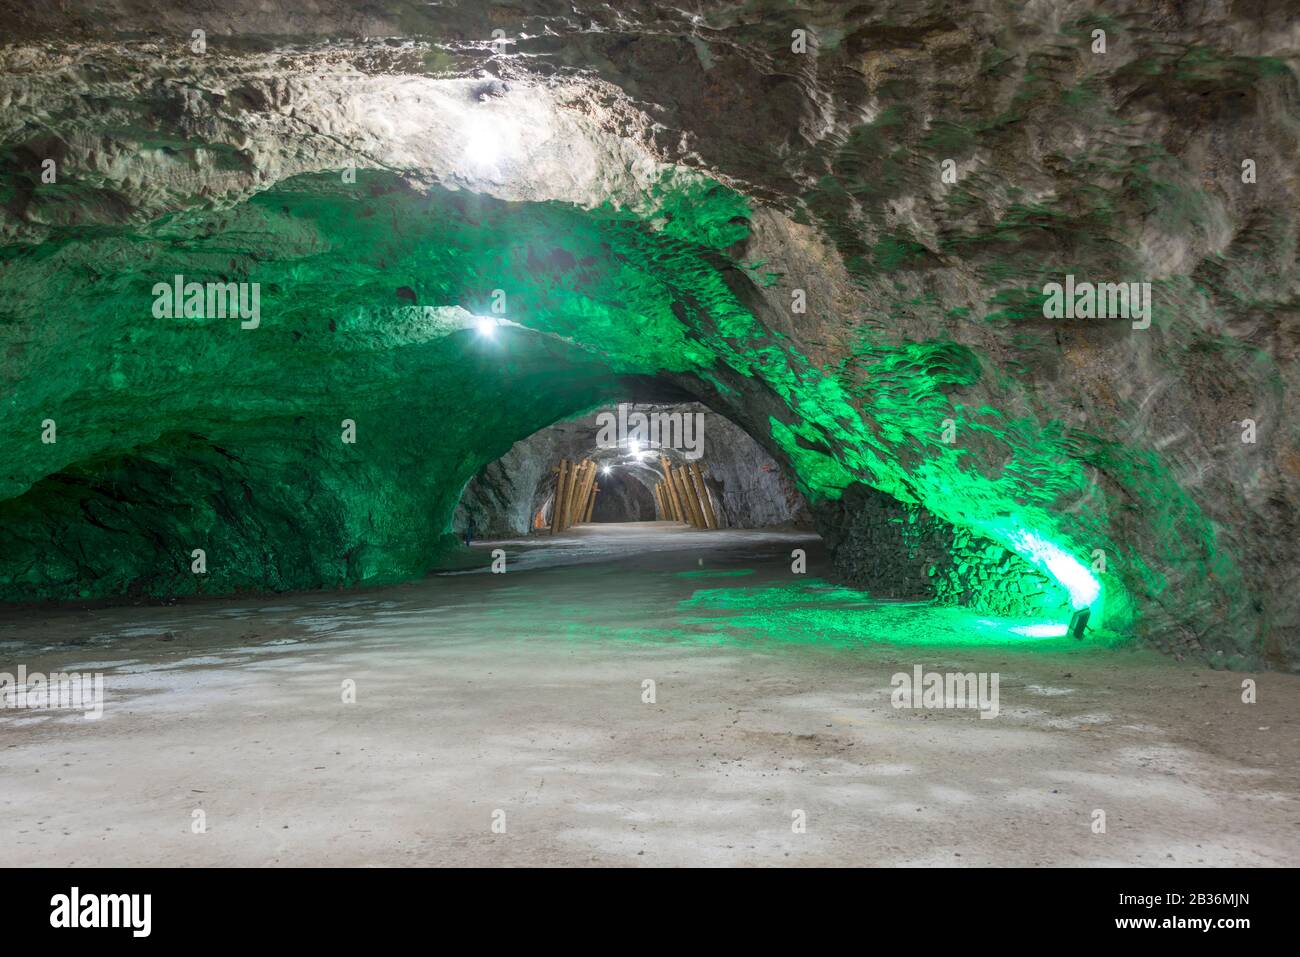 Cankiri province is famous for its salt mines.Researchers have discovered that one of the province's largest salt mines, located southeast of its capi Stock Photo